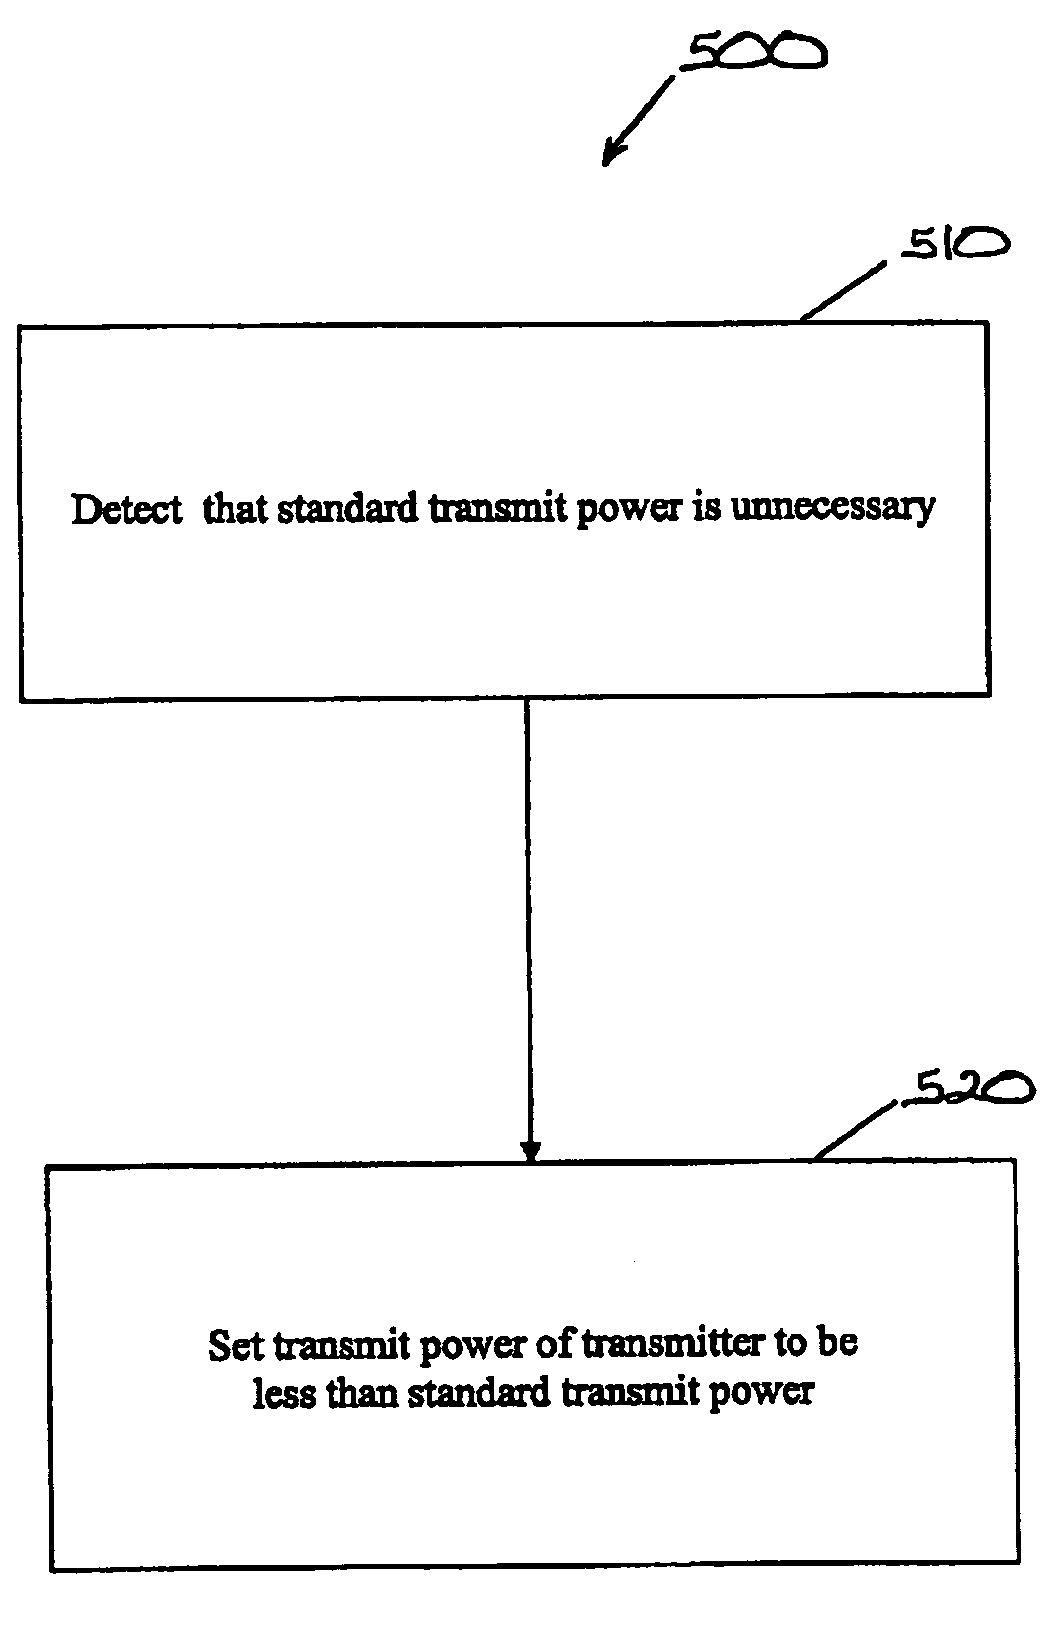 Apparatus and method for transmitting a signal at less than a standard transmit power in a network